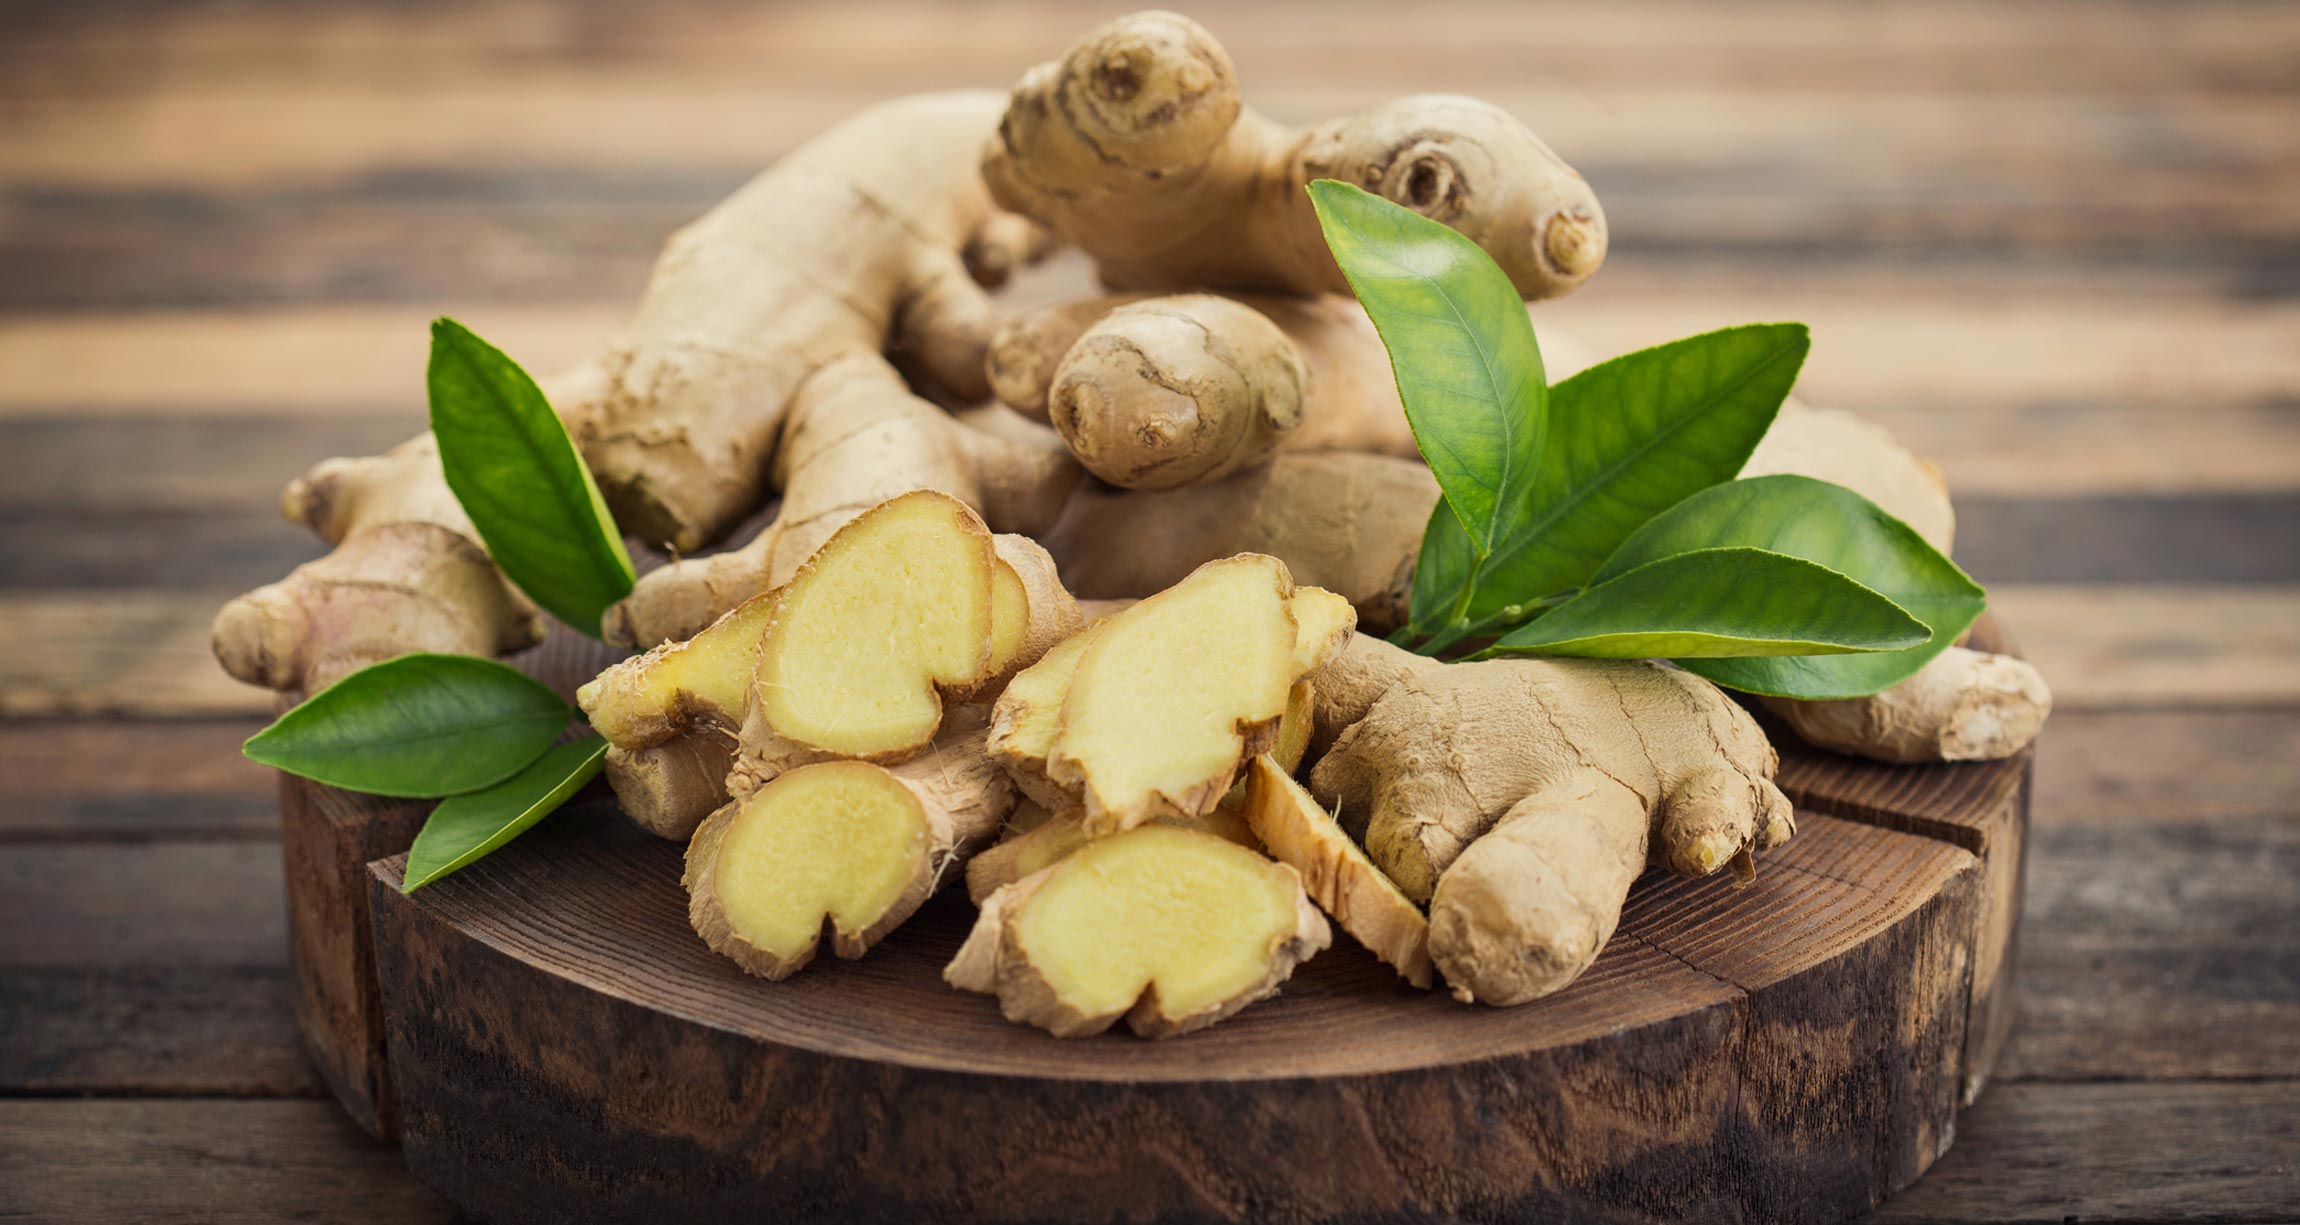 261181 blog featured ginger benefits 20171220 1630